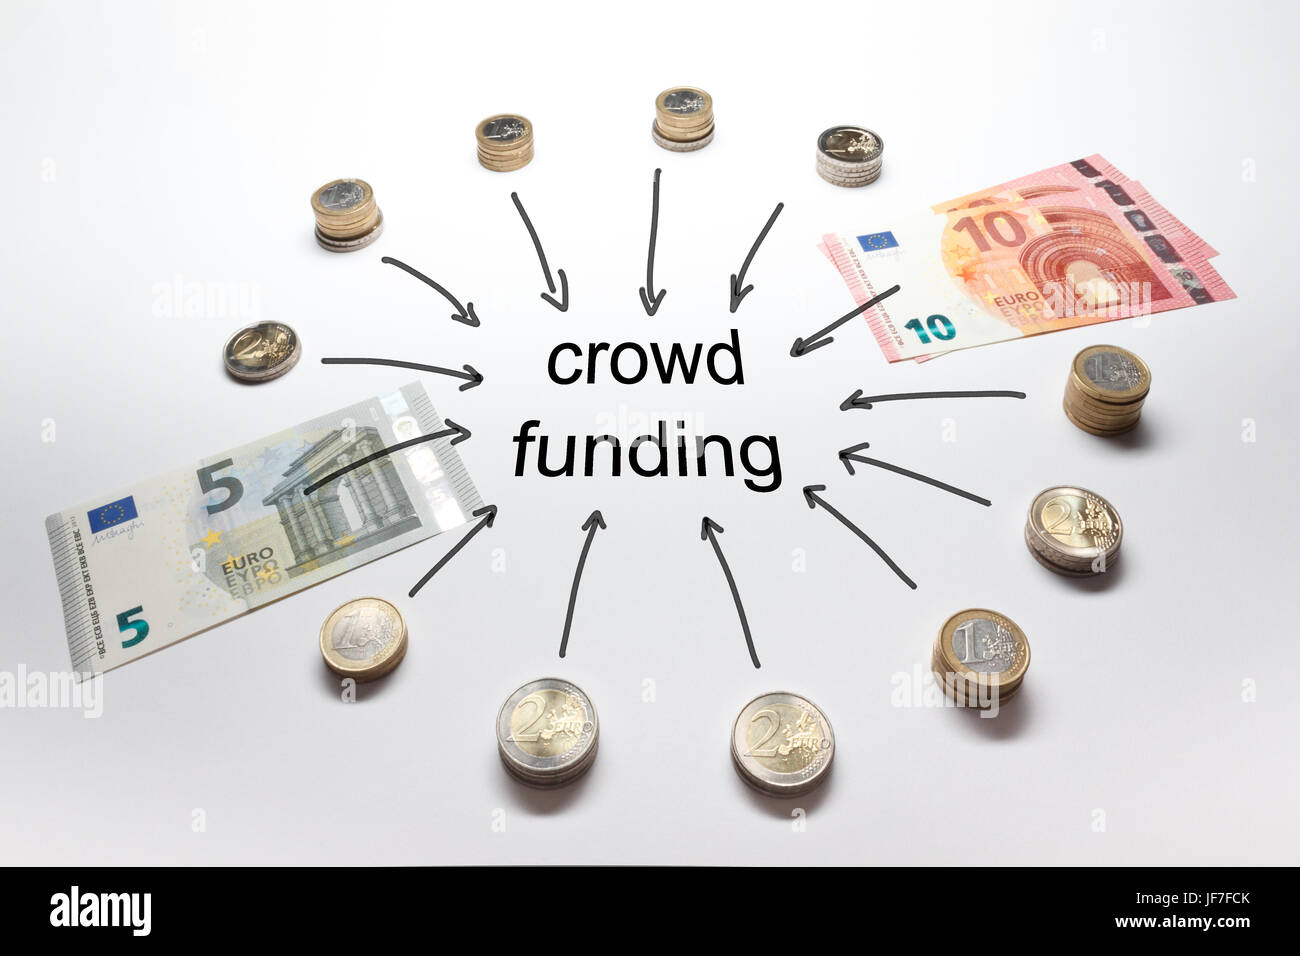 Crowd funding with the european currency Euro in coins and banknotes Stock Photo